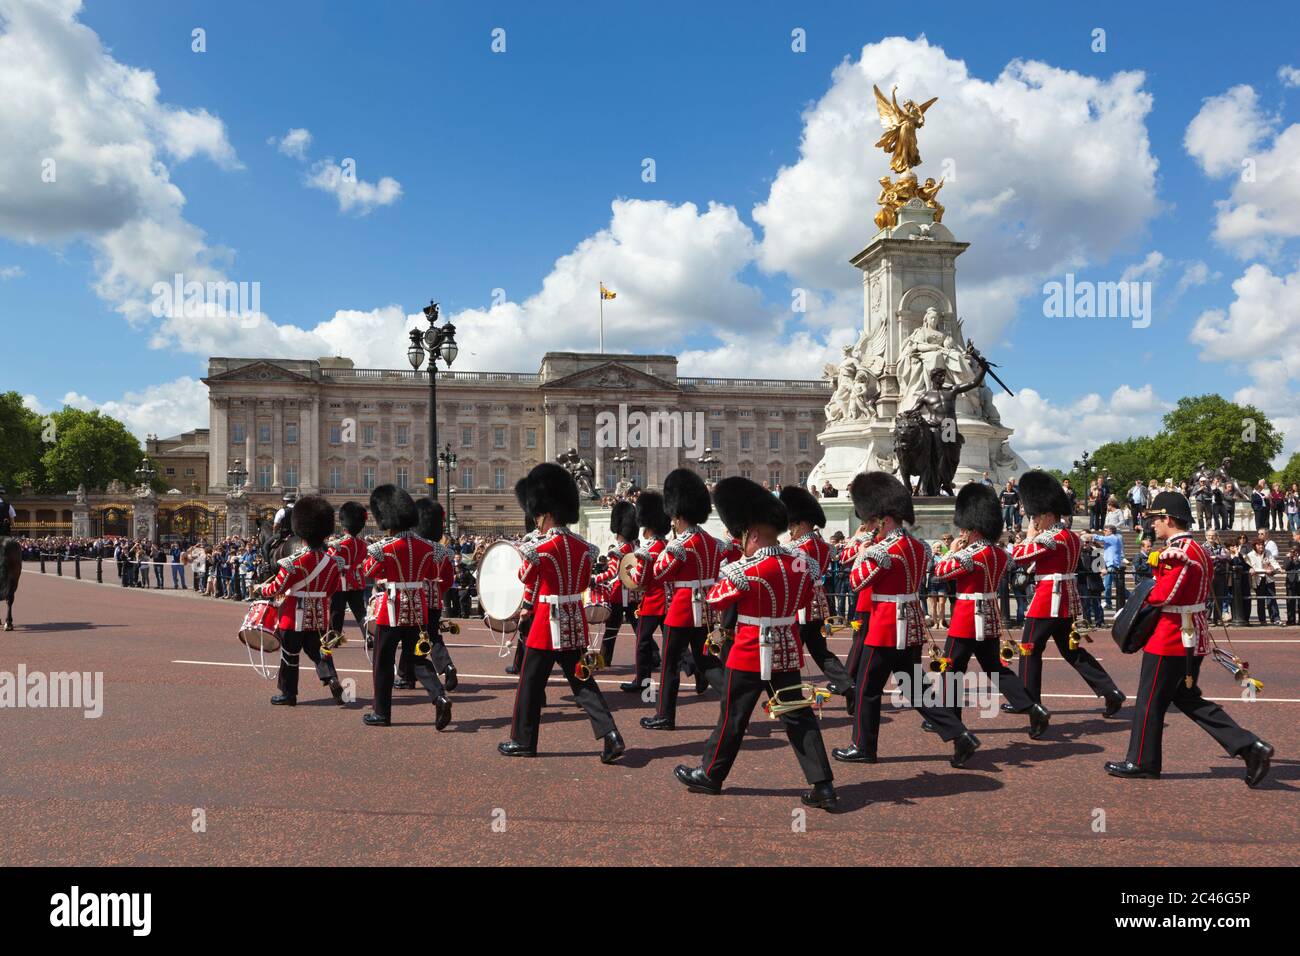 Band of the Guards marching past Buckingham Palace and the Queen Victoria Monument during the changing of the guard, London, England, United Kingdom Stock Photo